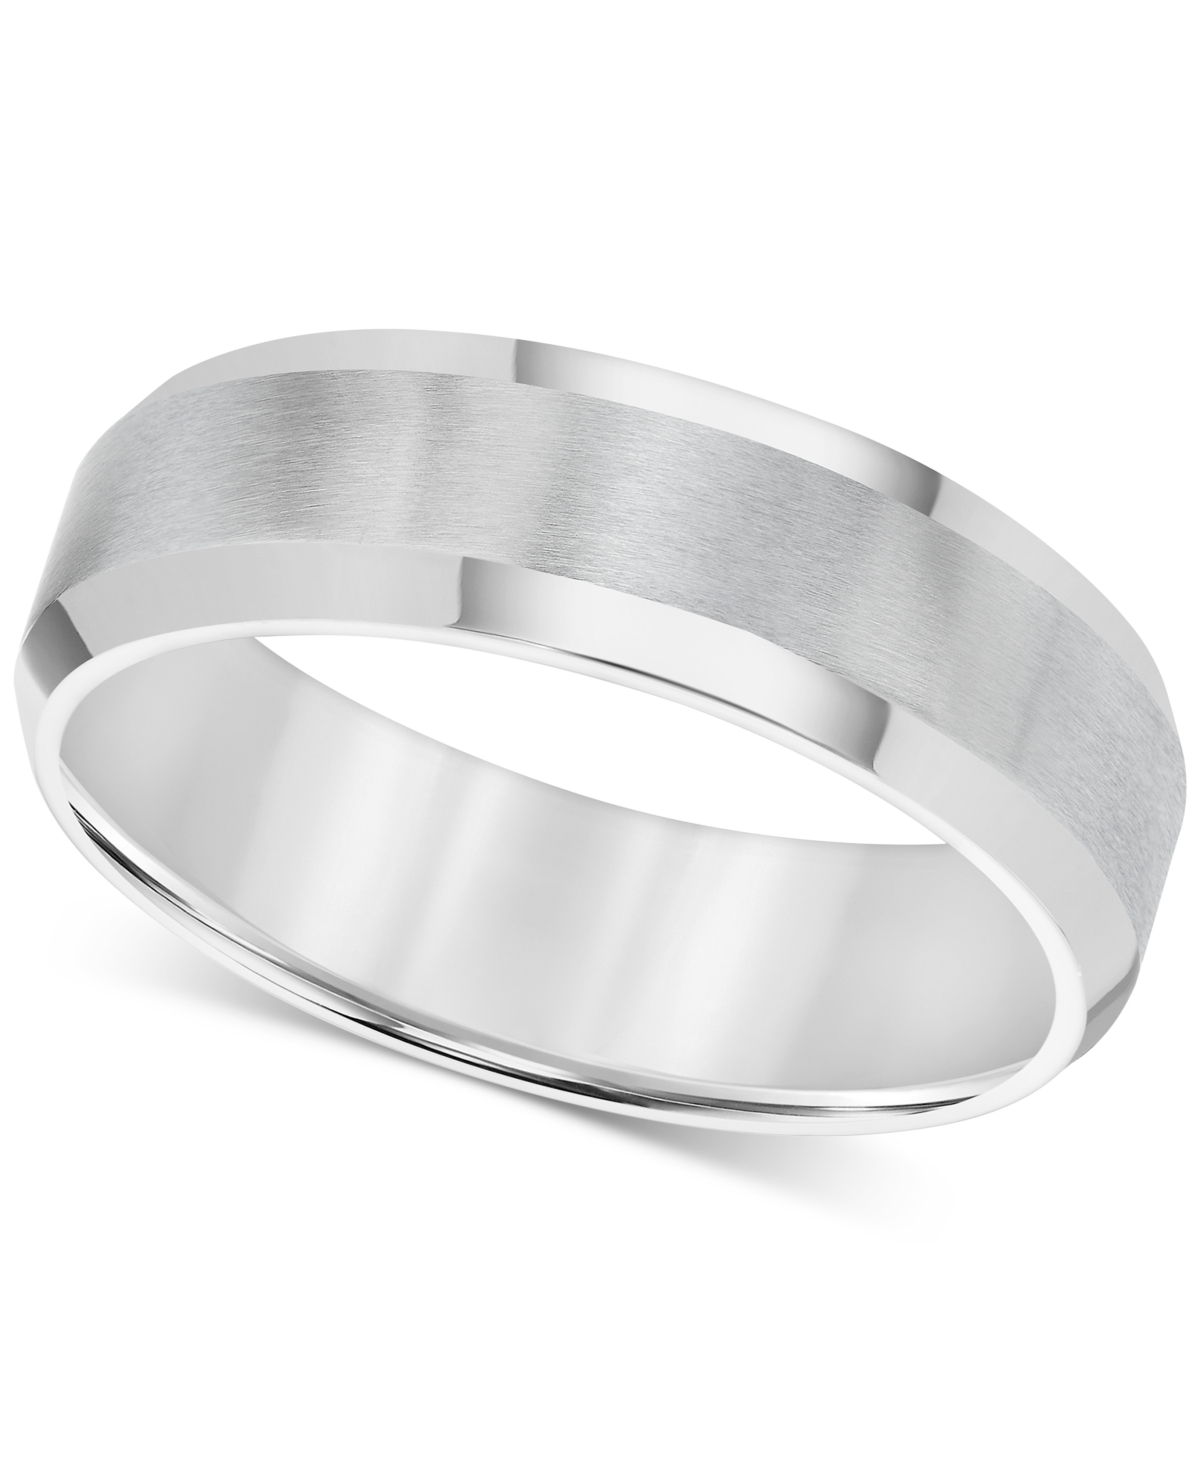 Men's Stainless Steel Ring, Smooth Comfort Fit Wedding Band - Steel